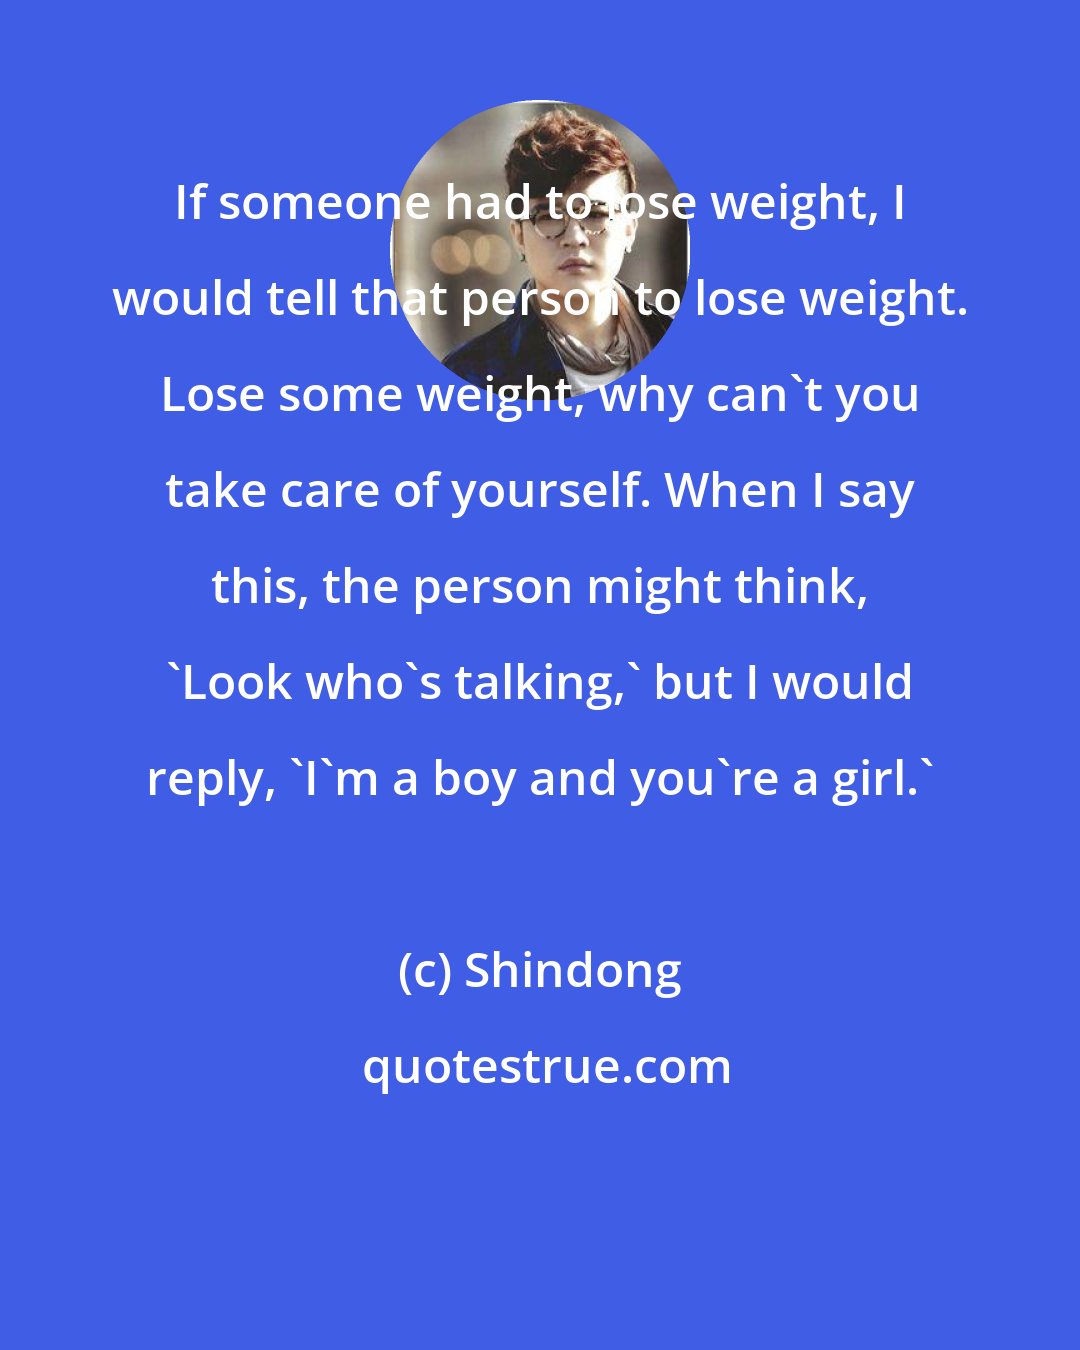 Shindong: If someone had to lose weight, I would tell that person to lose weight. Lose some weight, why can't you take care of yourself. When I say this, the person might think, 'Look who's talking,' but I would reply, 'I'm a boy and you're a girl.'